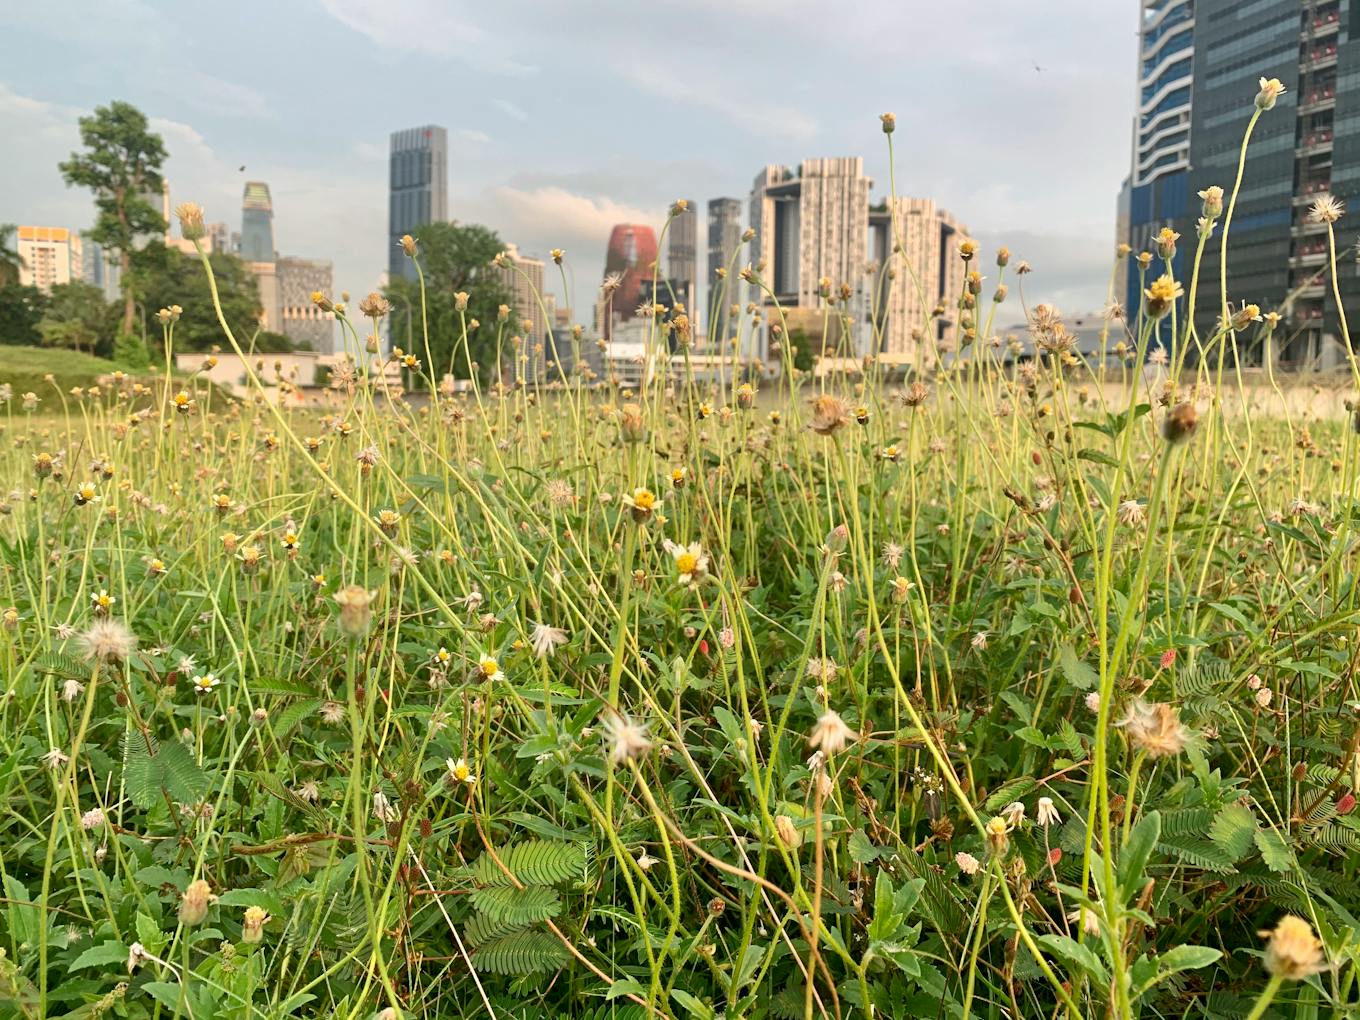 Wild daisies growing in a green space at Outram Park, central Singapore. Image: Robin Hicks/Eco-Business